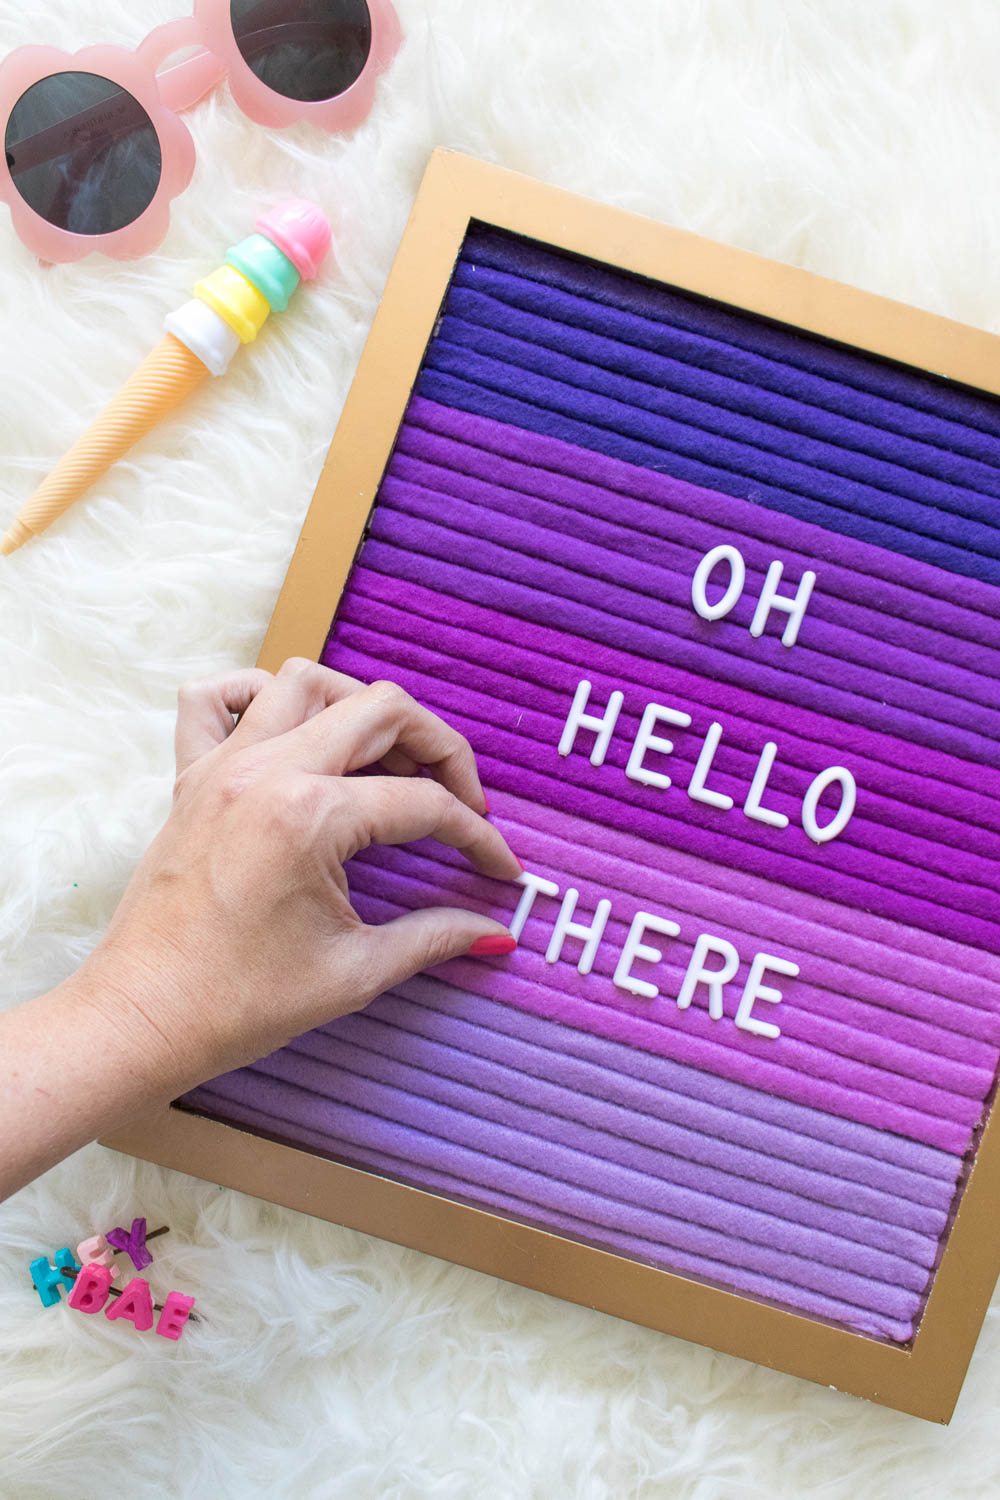 DIY ombre felt letter board (via www.clubcrafted.com)